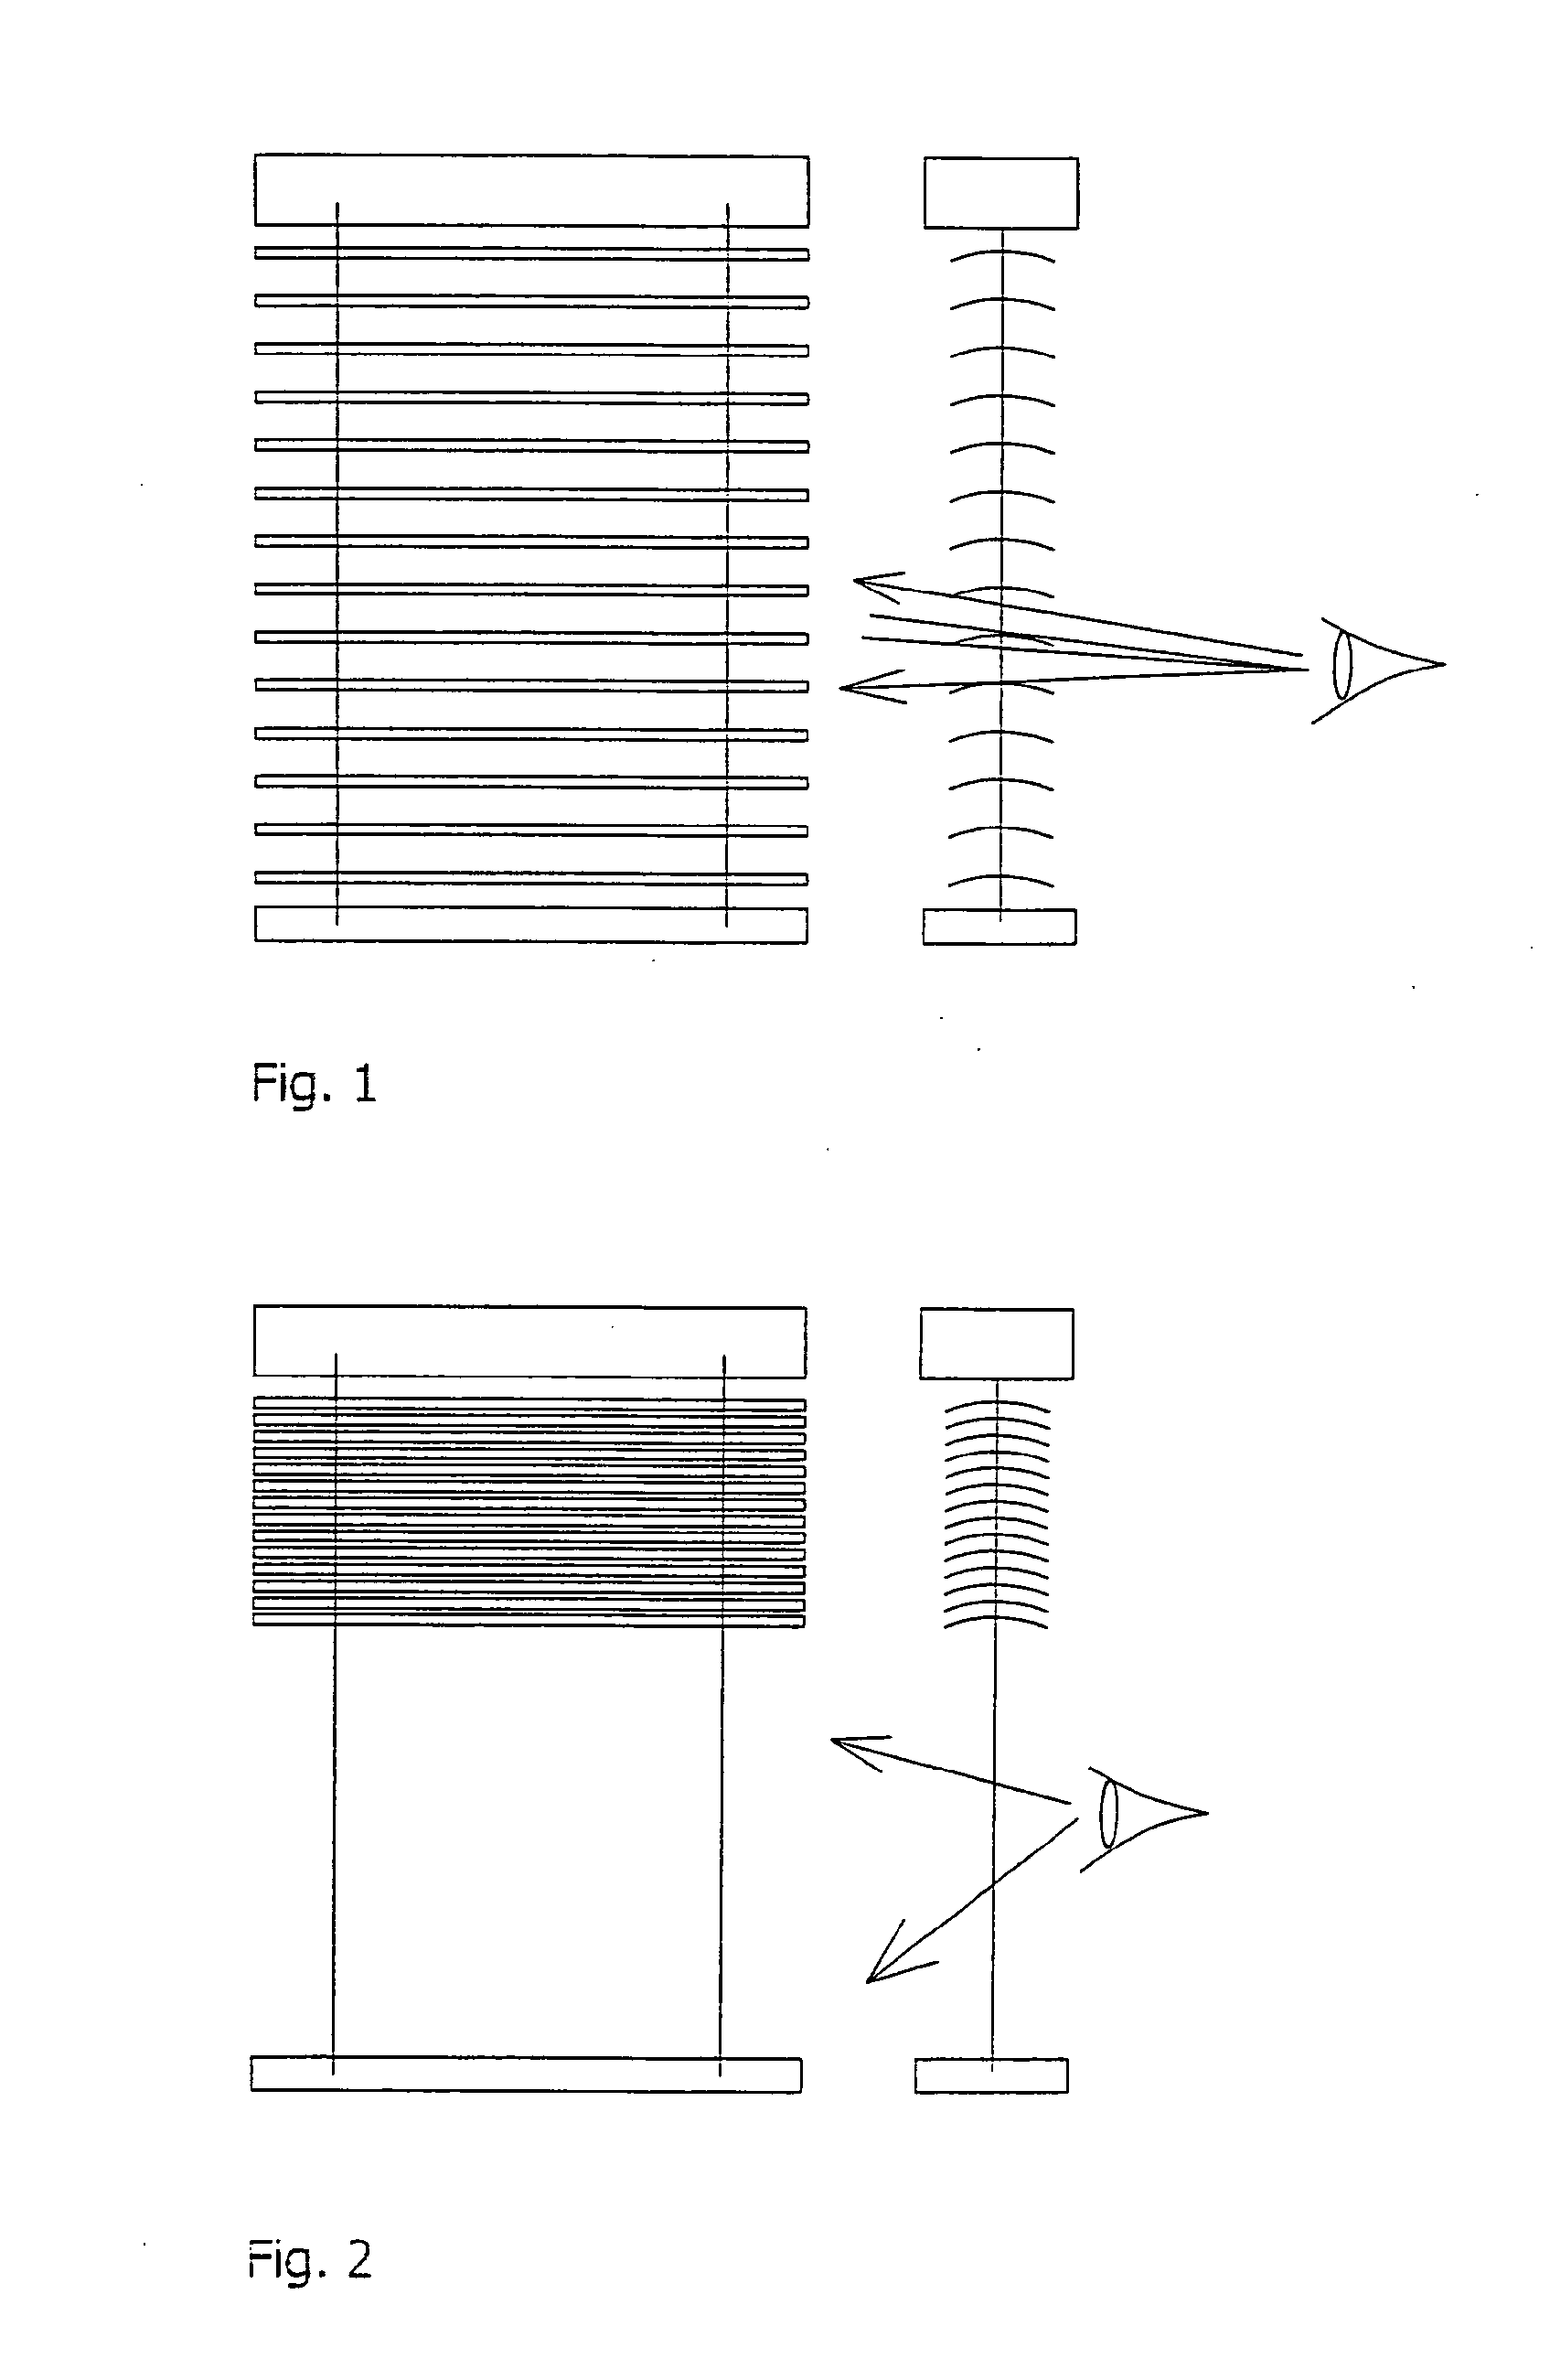 Blind device  for light protection and displaying of information